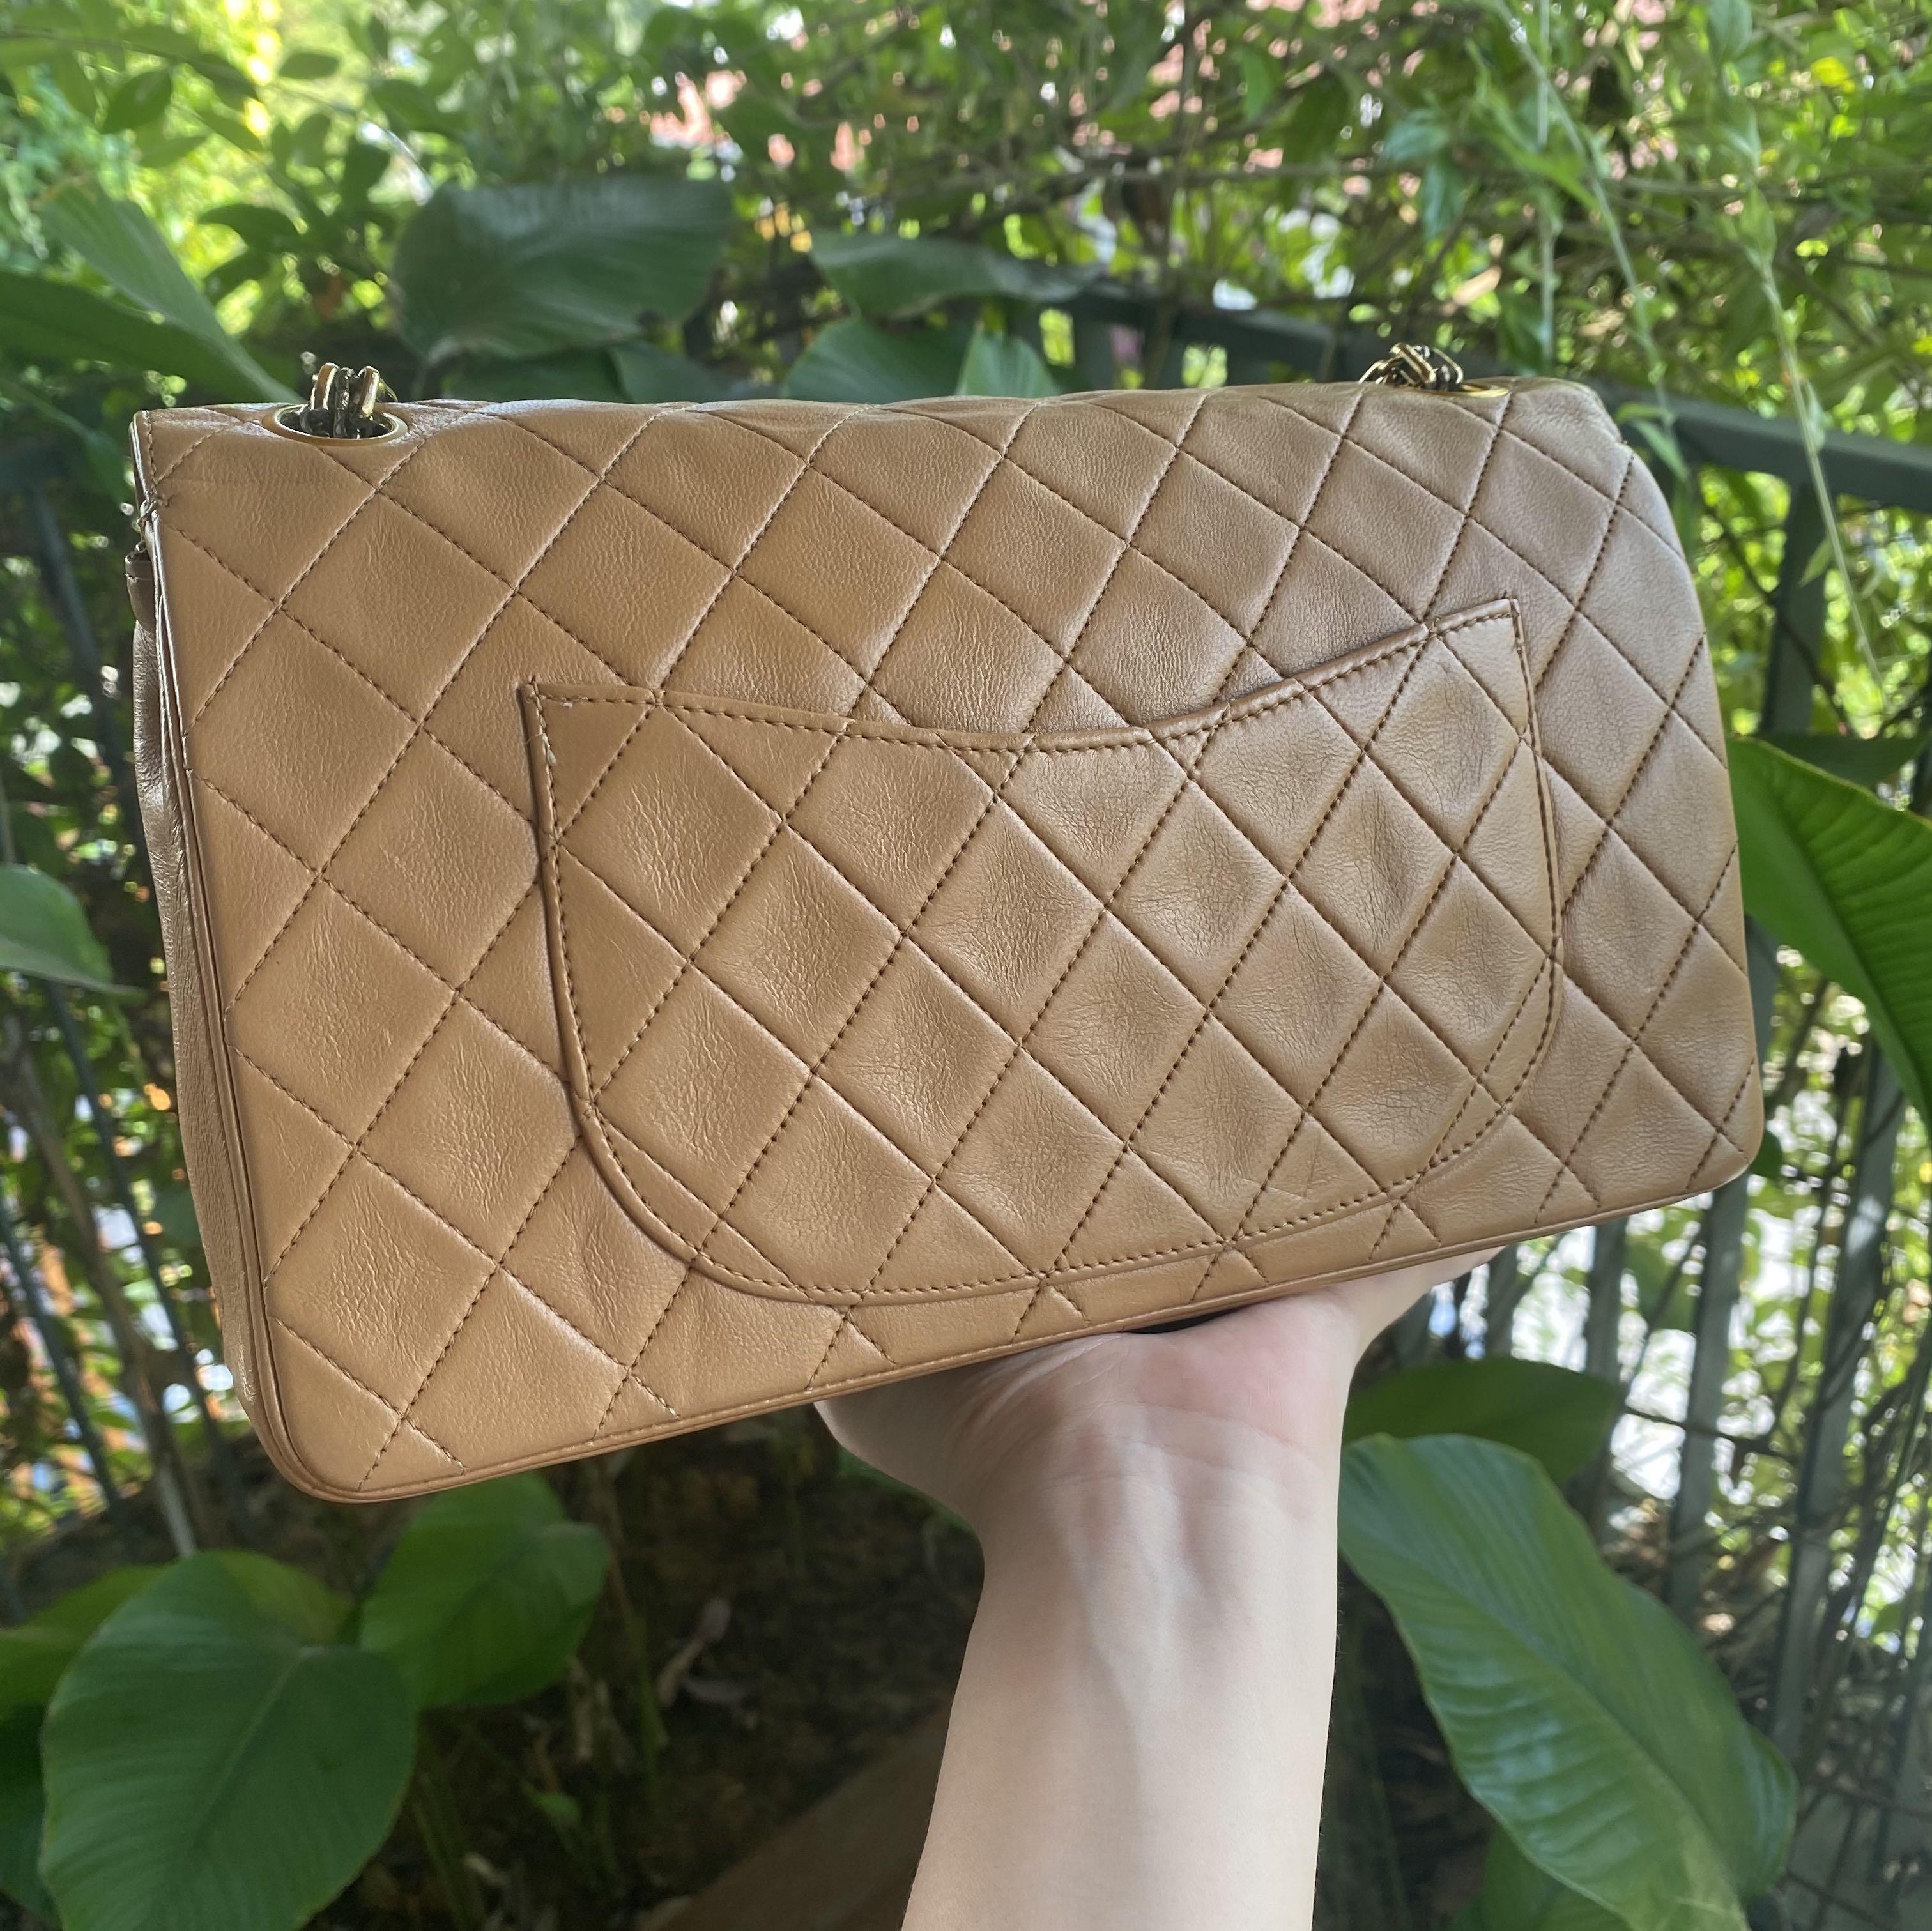 Chanel Lambskin Quilted Mini Citizen Chic Flap Black One Month Honest  Review - heyyyceej 